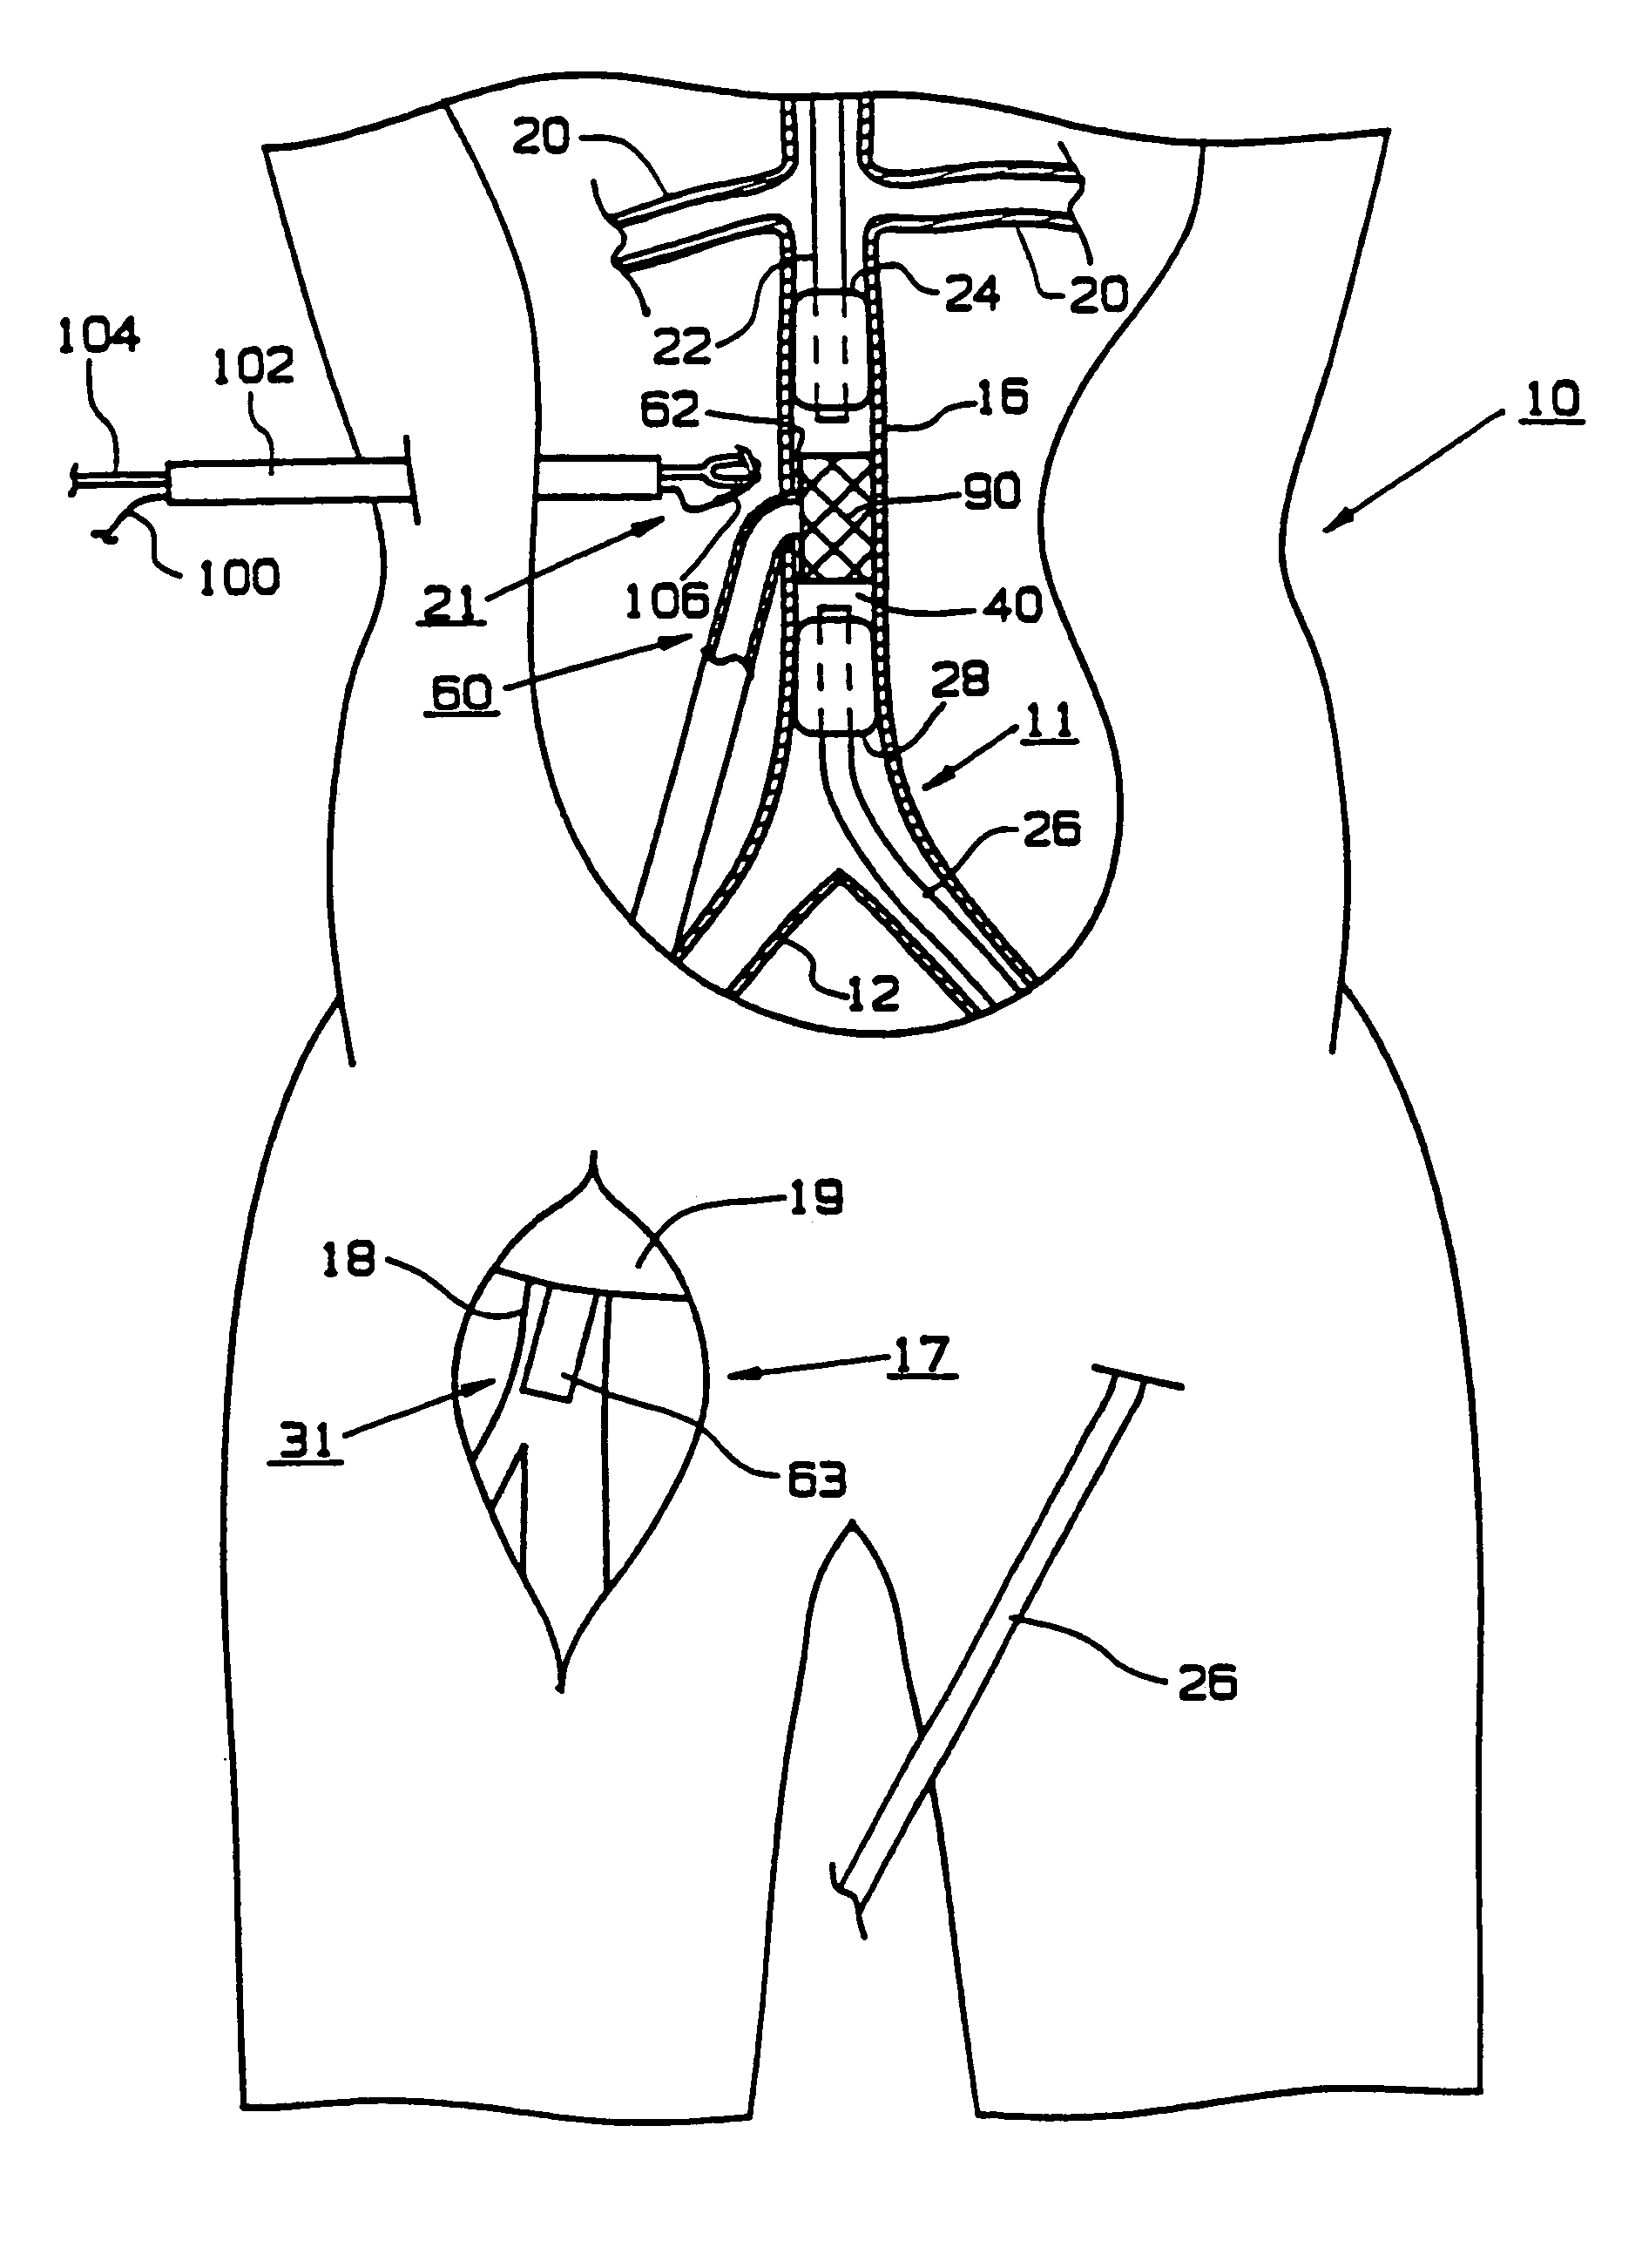 Endoscopic bypass grafting method utilizing an inguinal approach